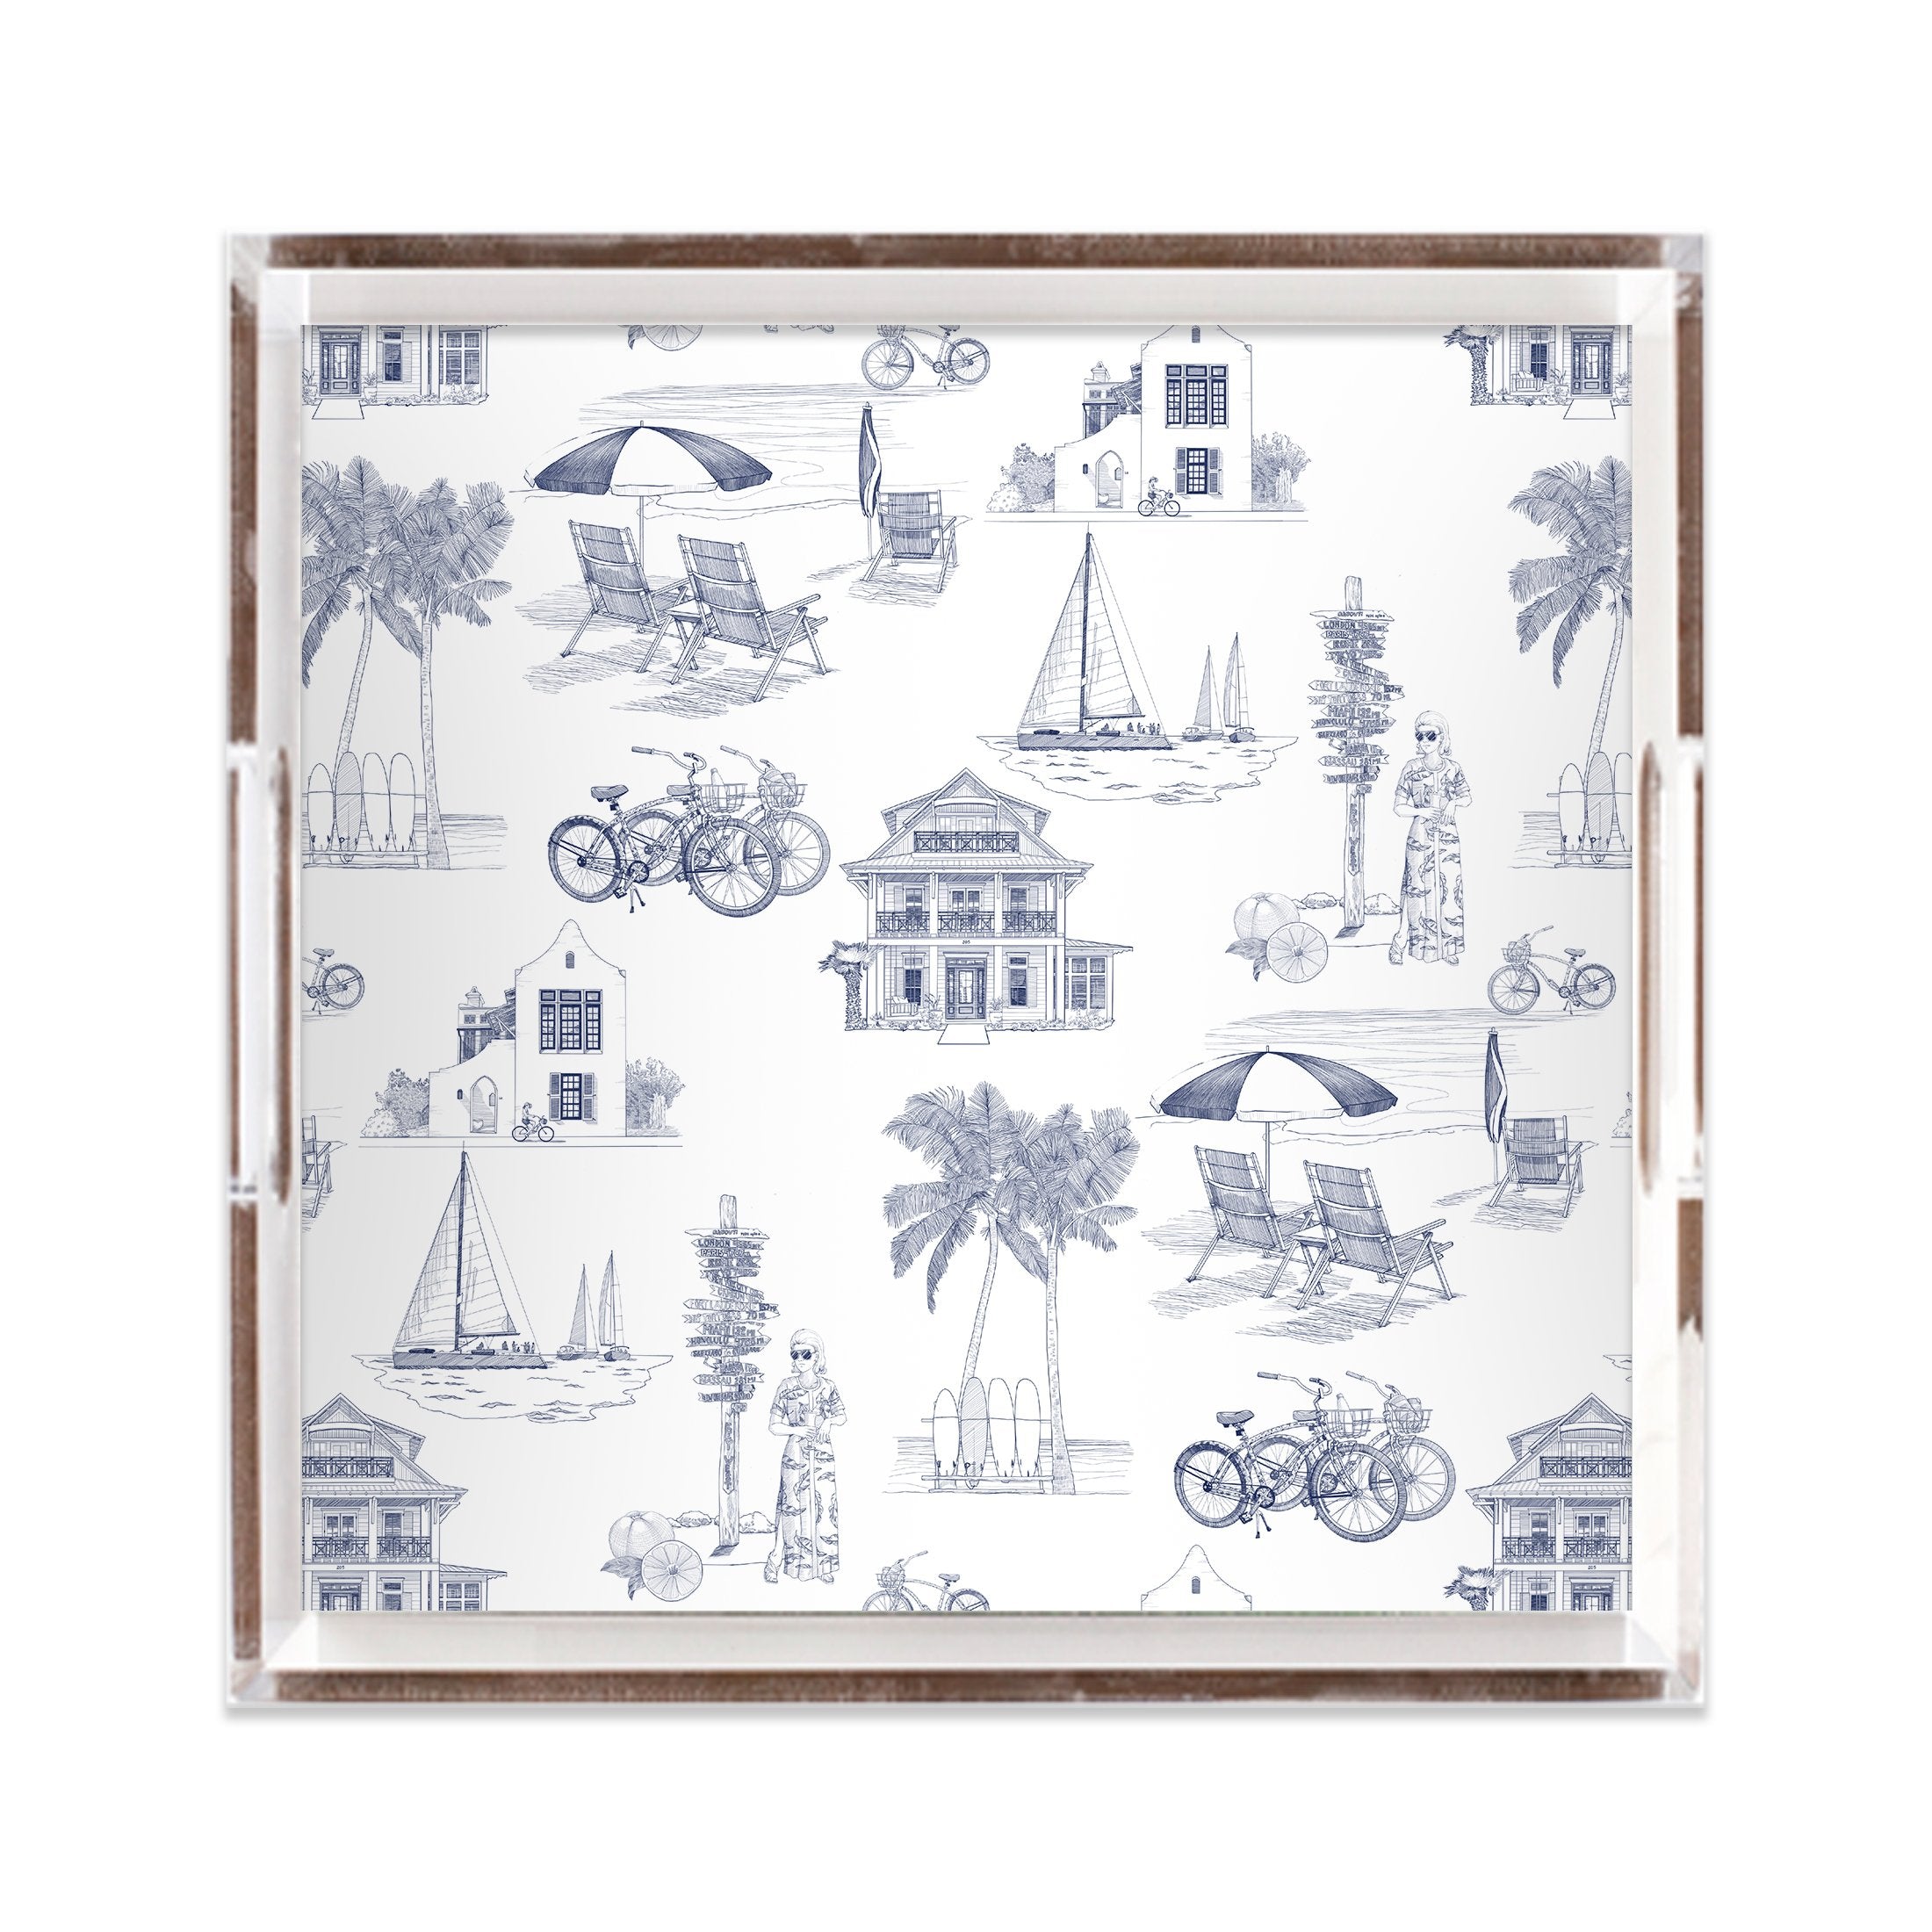 https://cdn.shopify.com/s/files/1/0665/3515/products/florida-toile-lucite-tray-lucite-trays-12x12-navy-katie-kime-28575859474529.jpg?v=1693332041